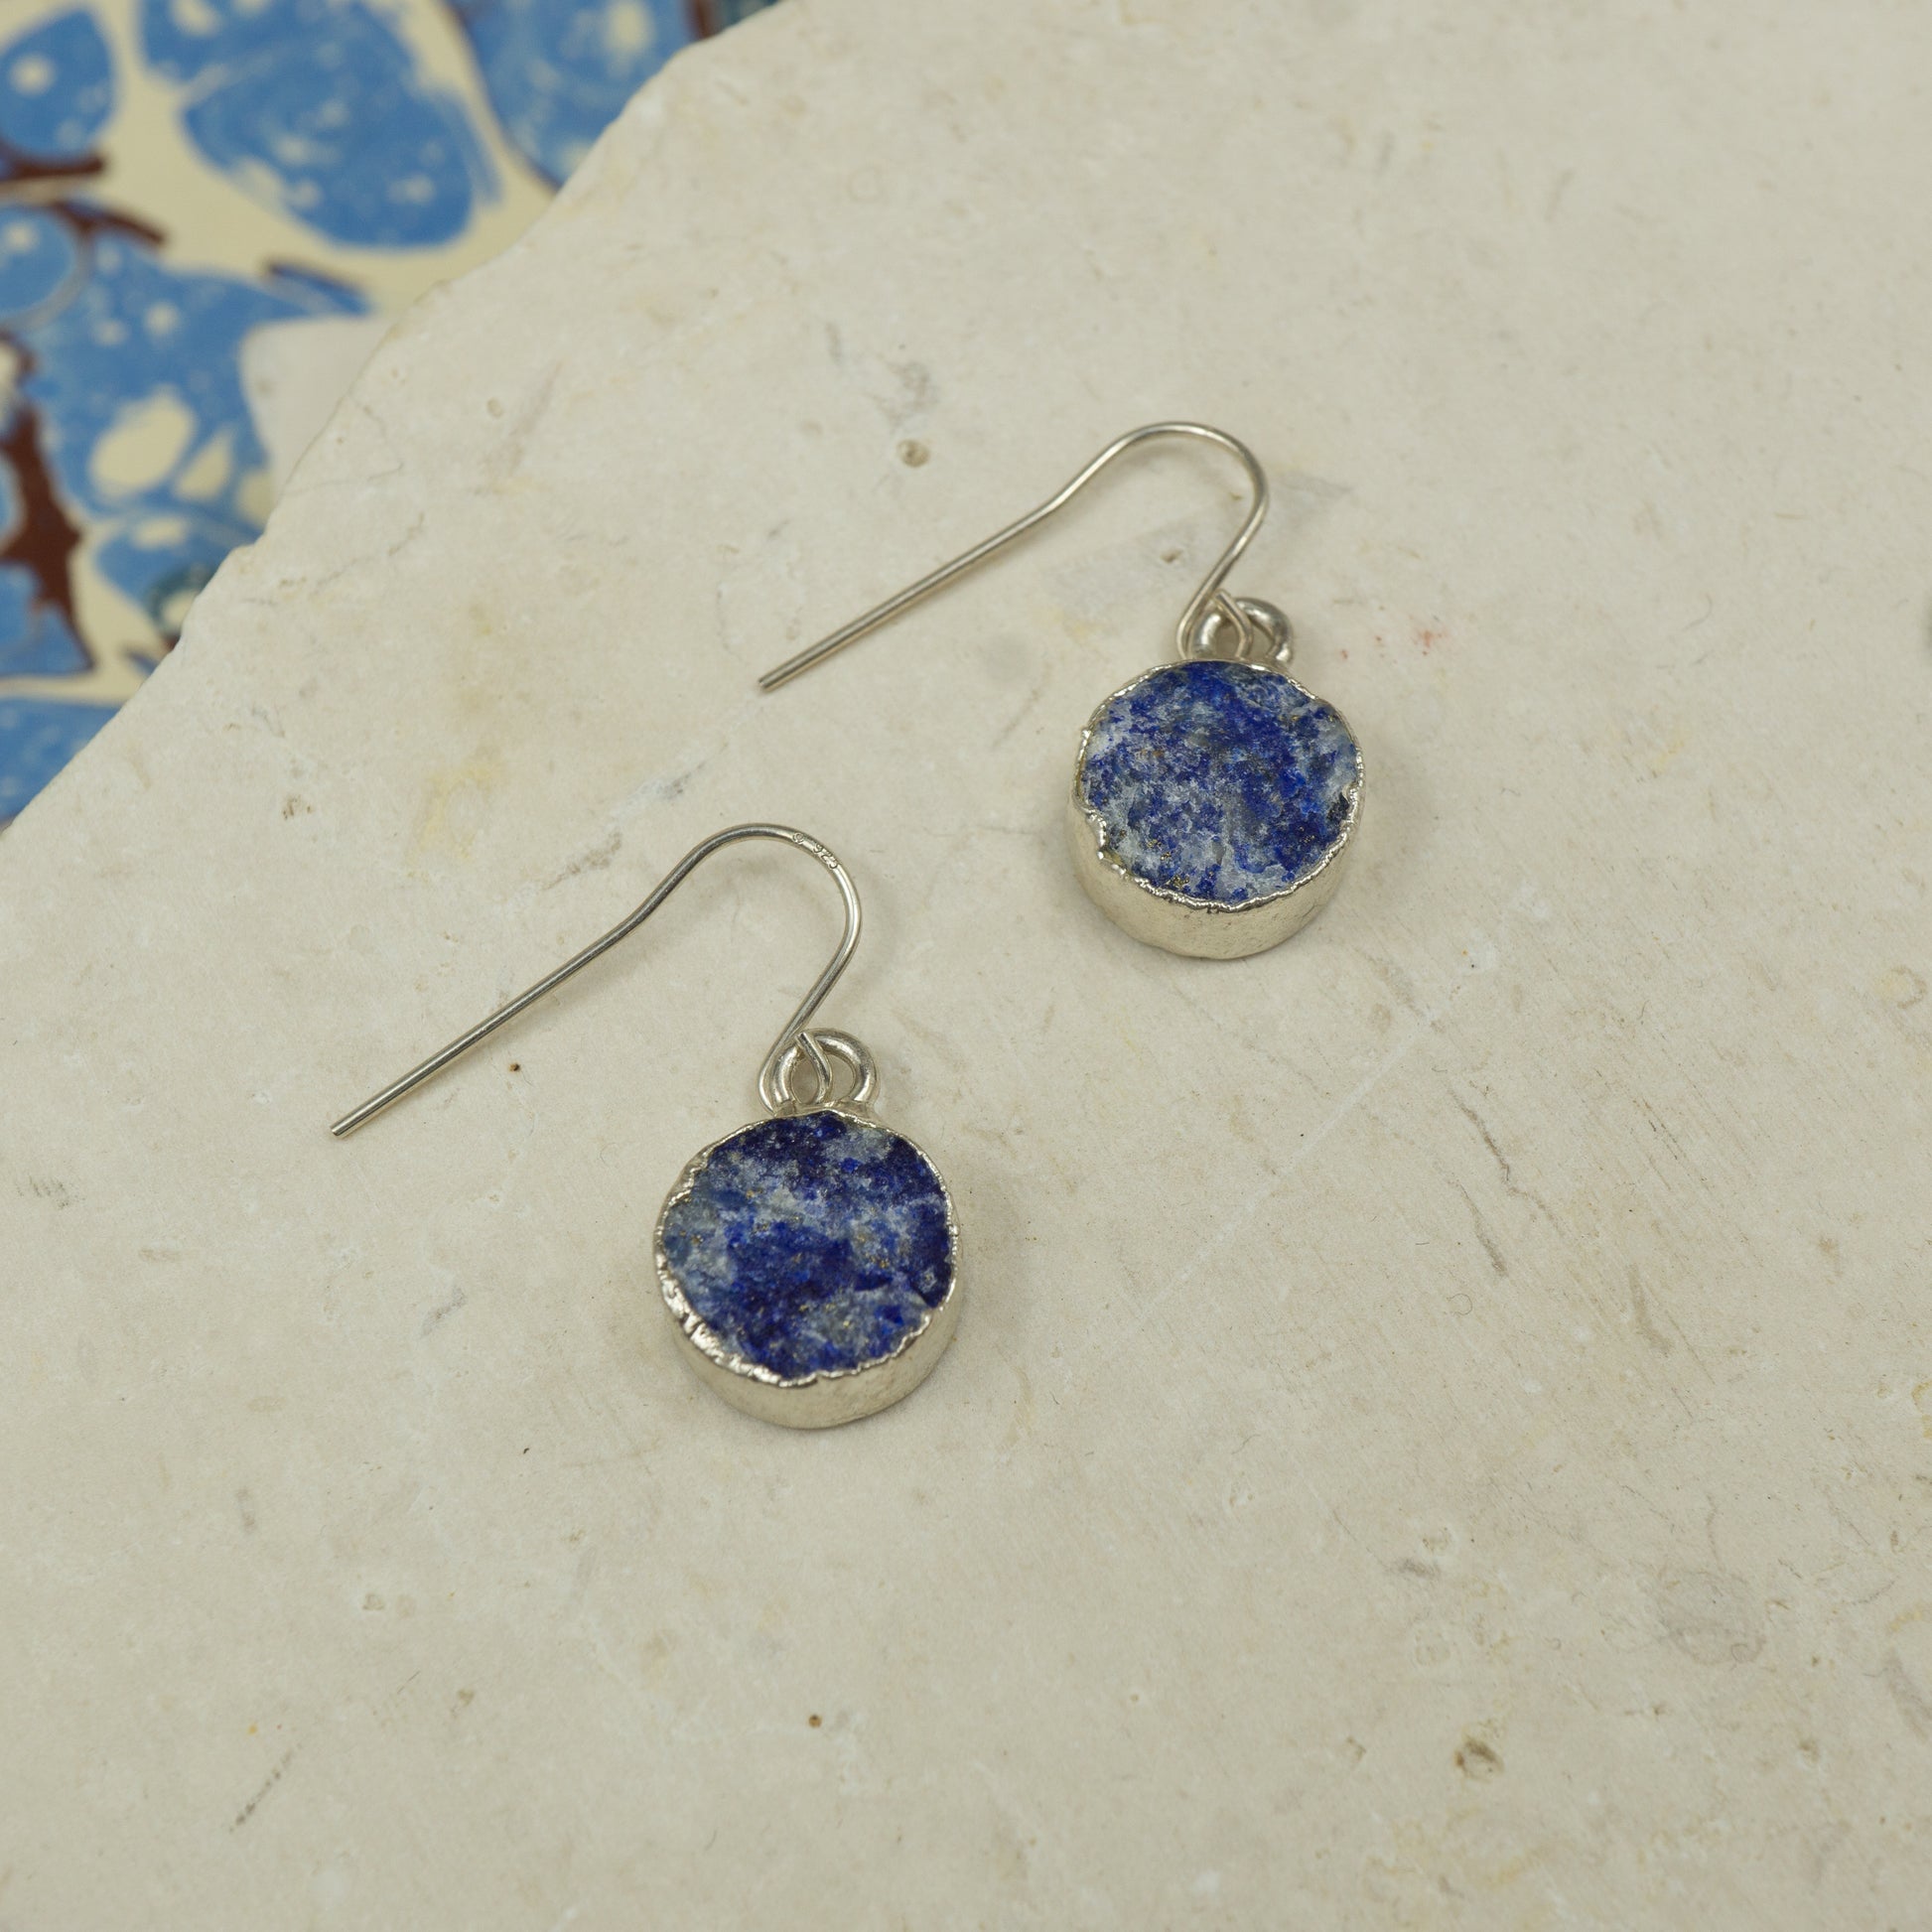 Round raw Blue Lapis Lazuli earrings on hooks finished in Silver..